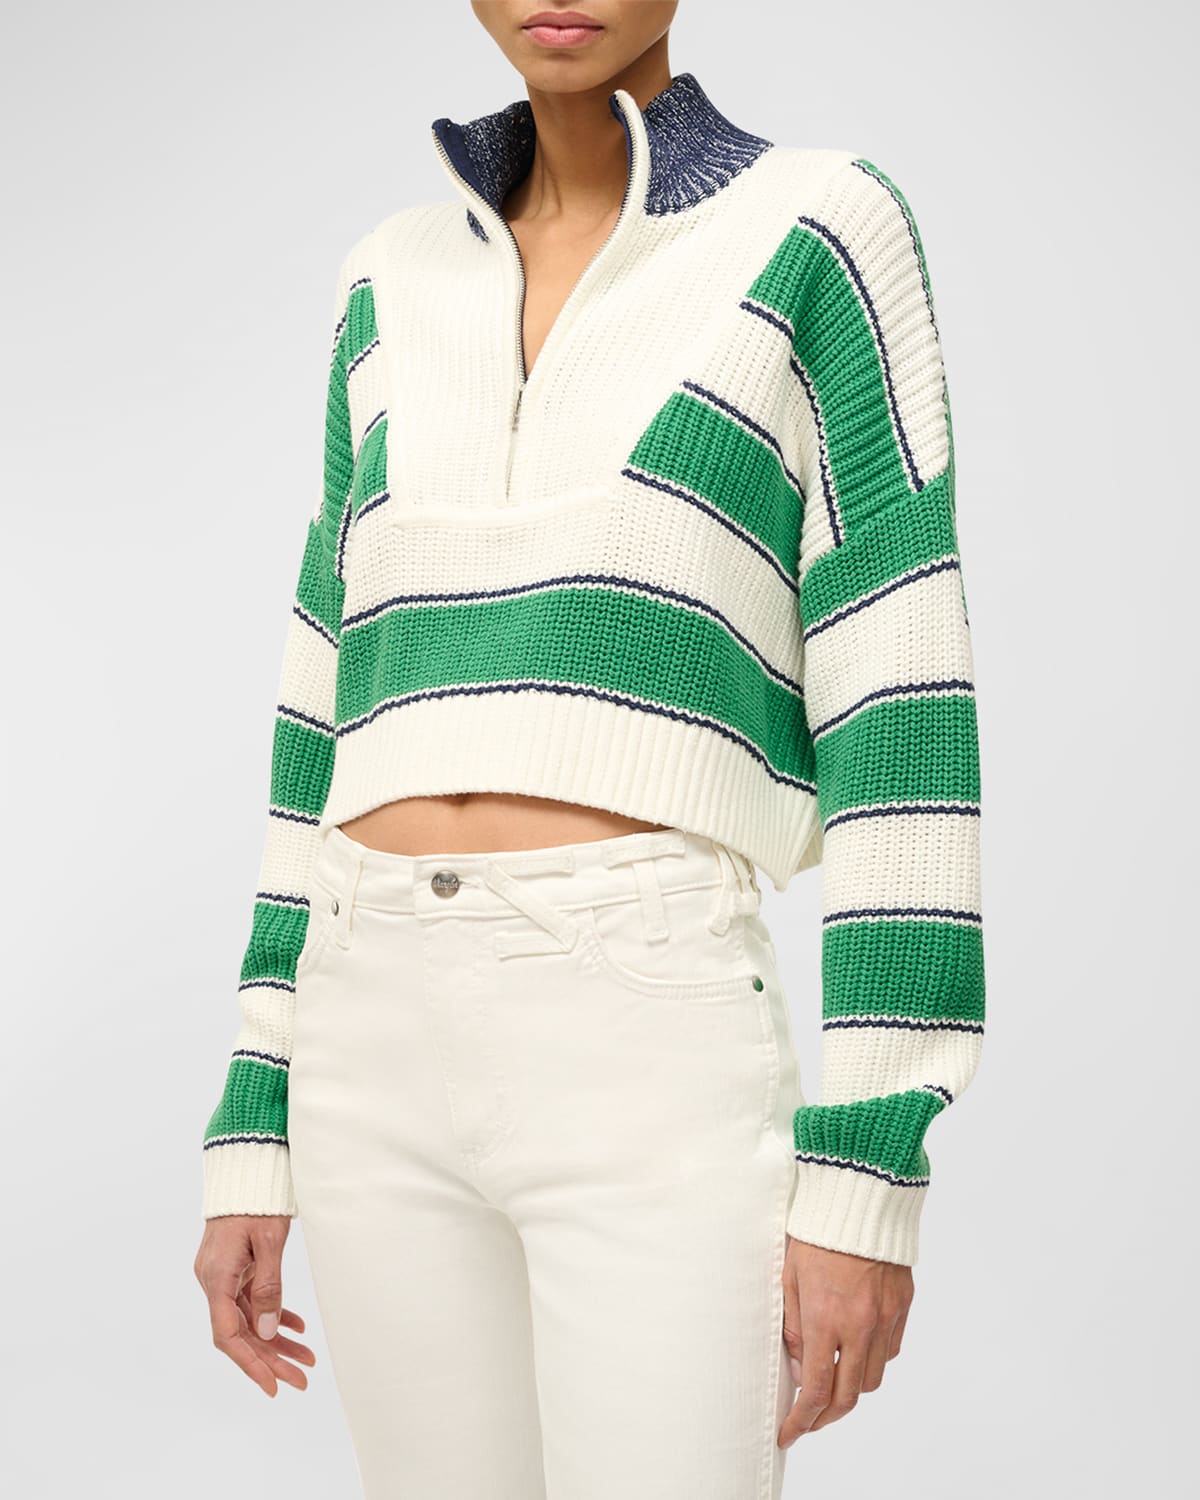 Hampton Chunky Stripe Knit Cropped Pullover Sweater